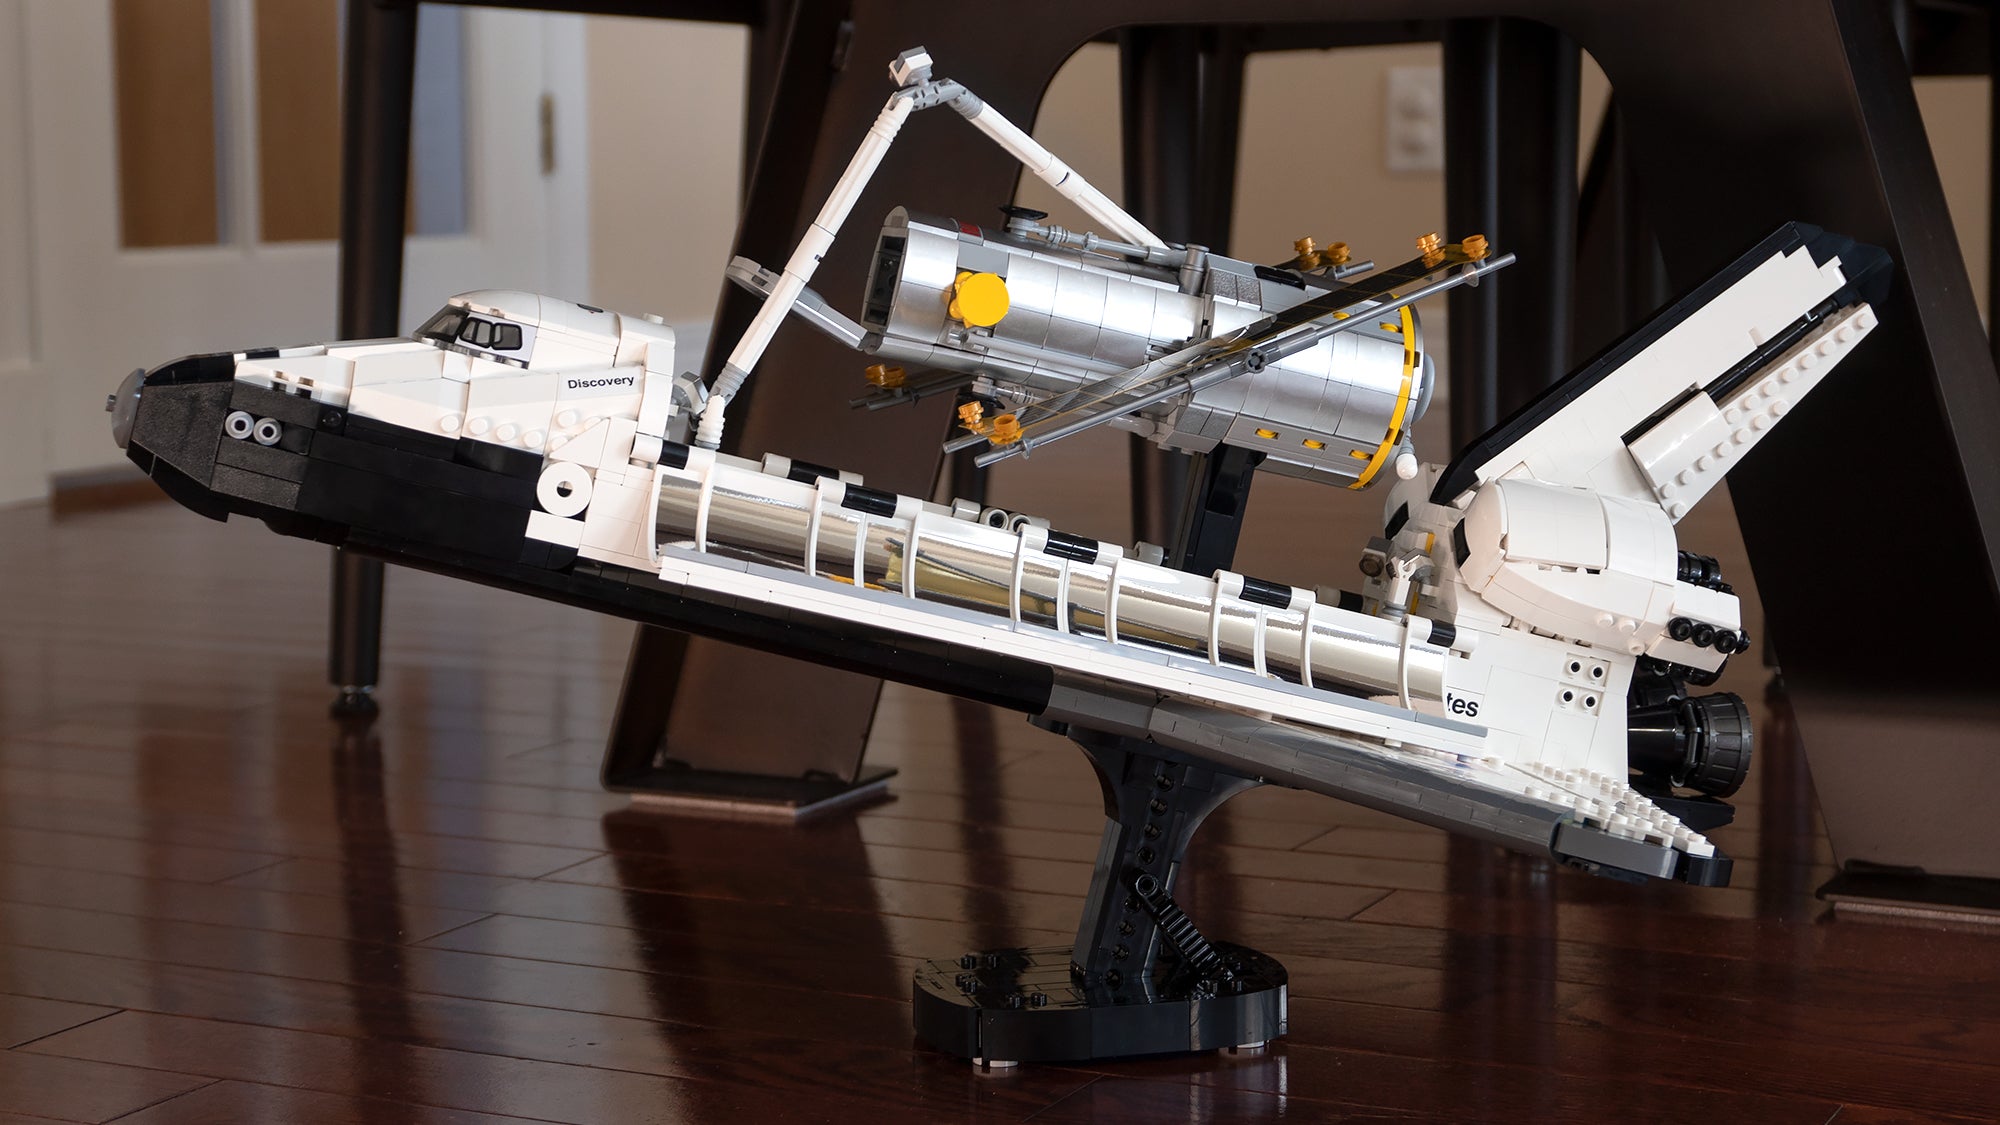 Lego has included three display stands that can be used to support the Discovery orbiter, the Hubble Space Telescope, and a third that makes the satellite appear to float above the orbiter's cargo bay. (Photo: Andrew Liszewski/Gizmodo)